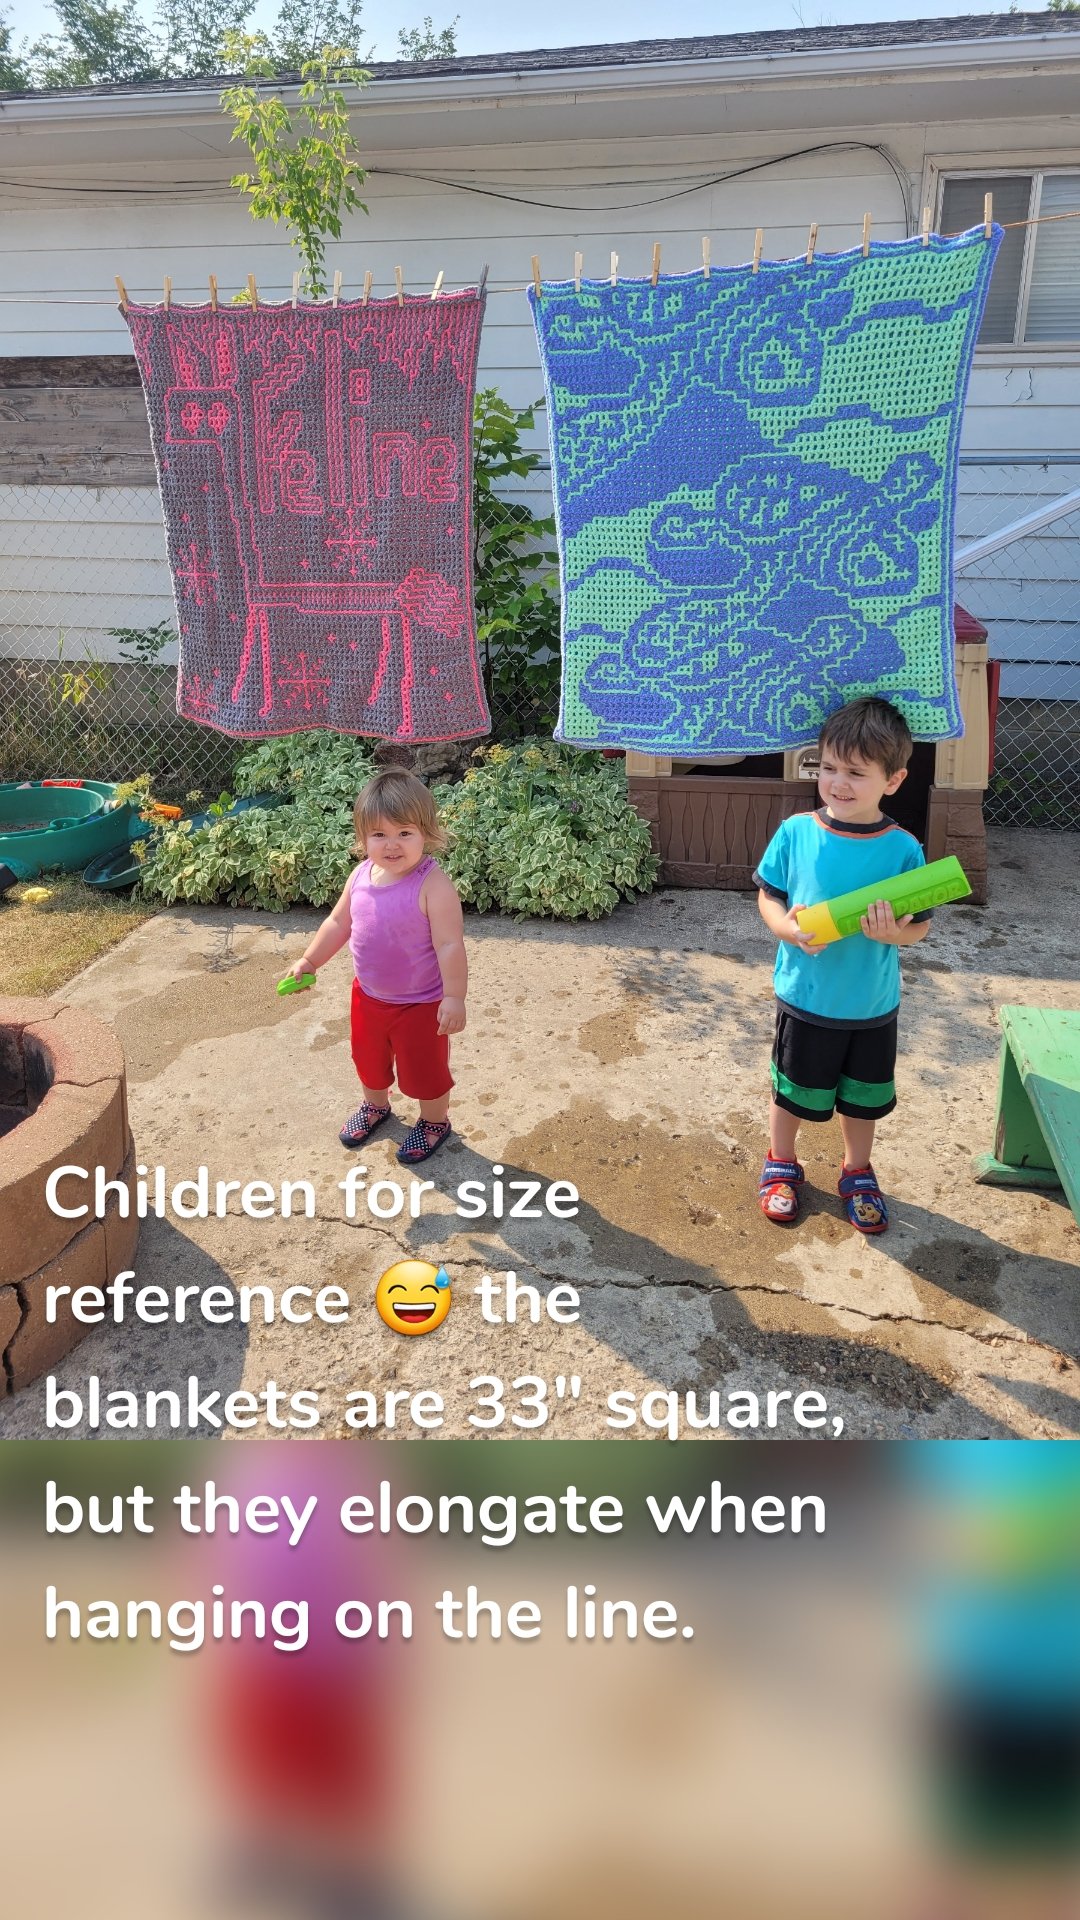 Children for size reference 😅 the blankets are 33" square, but they elongate when hanging on the line.